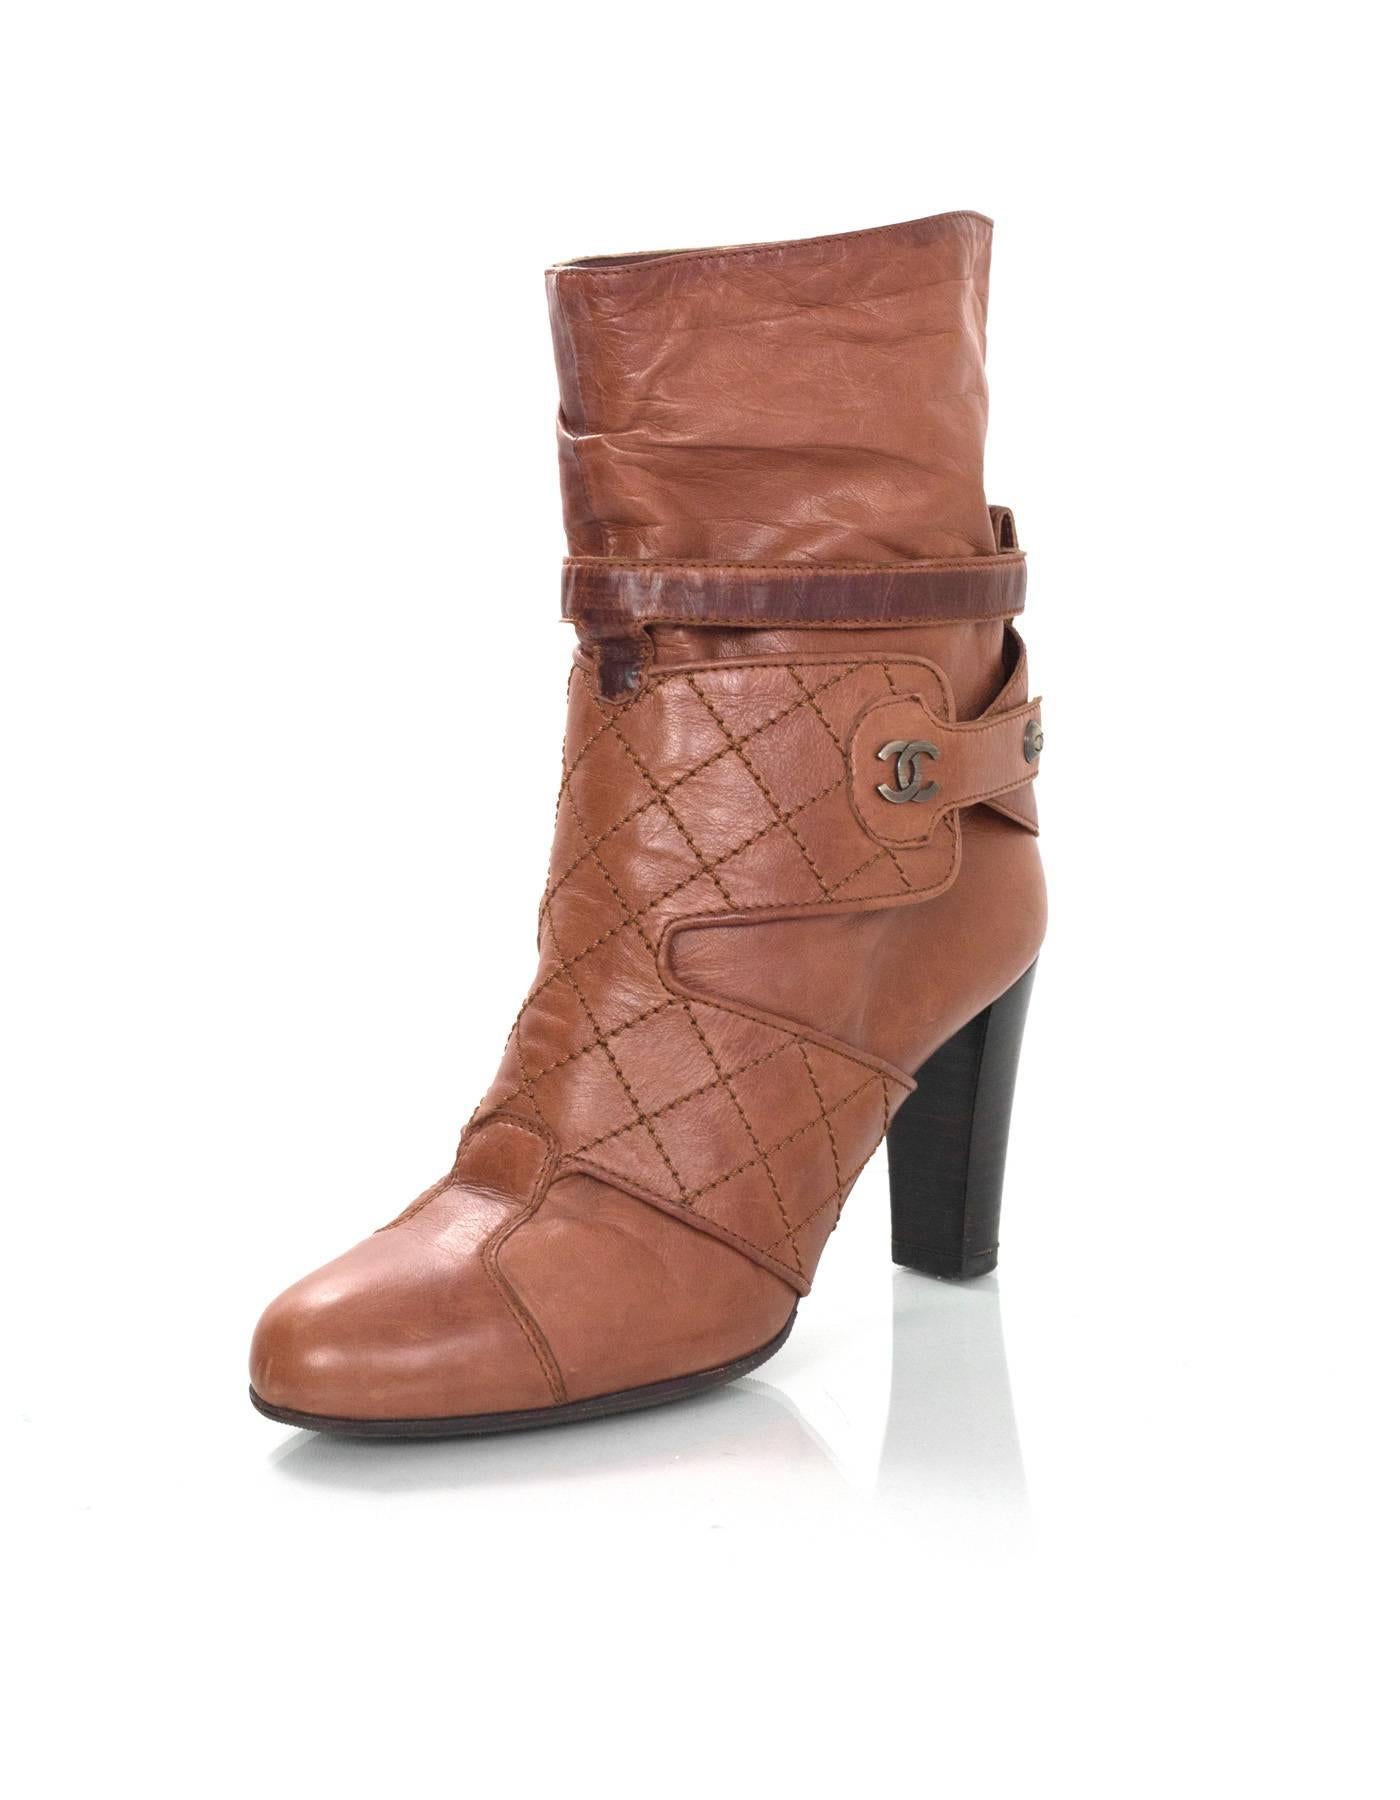 Chanel Tan Ankle Boots Sz 37

Made In: Italy
Color: Tan
Materials: Leather
Closure/Opening: Slide on
Sole Stamp: CC Made In Italy 37
Overall Condition: Very good pre-owned condition with the exception of being re-soled, light scuffs and waters marks